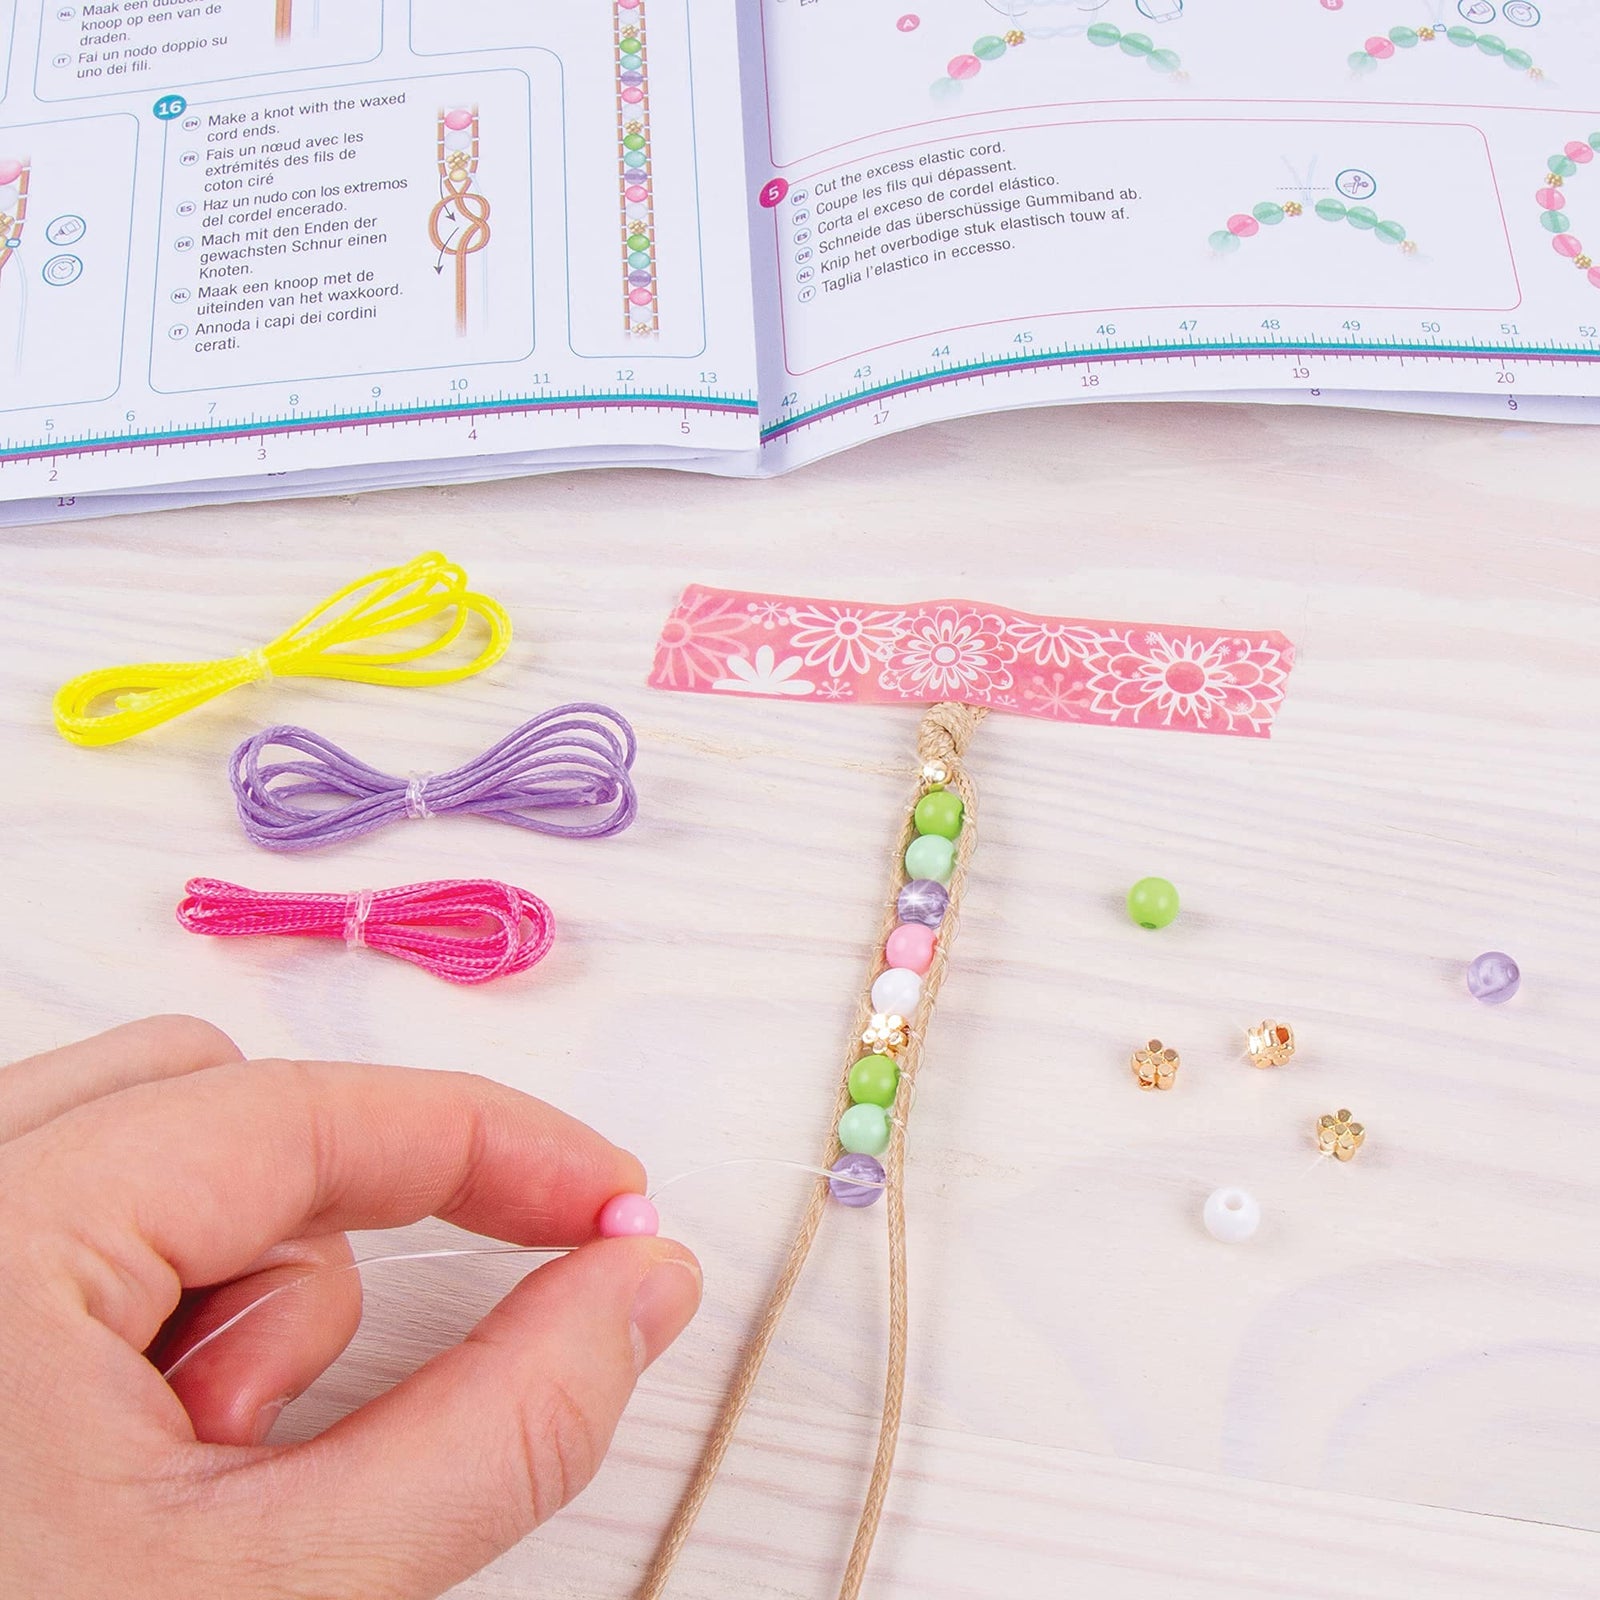 Make It Real - Crystal Dreams: Nature's Tale Jewelry - DIY Charm Bracelet Making Kit with Case - Friendship Bracelet Kit with Beads & Charms - Arts & Crafts Bead Kit for Girls - Makes 9 Bracelets